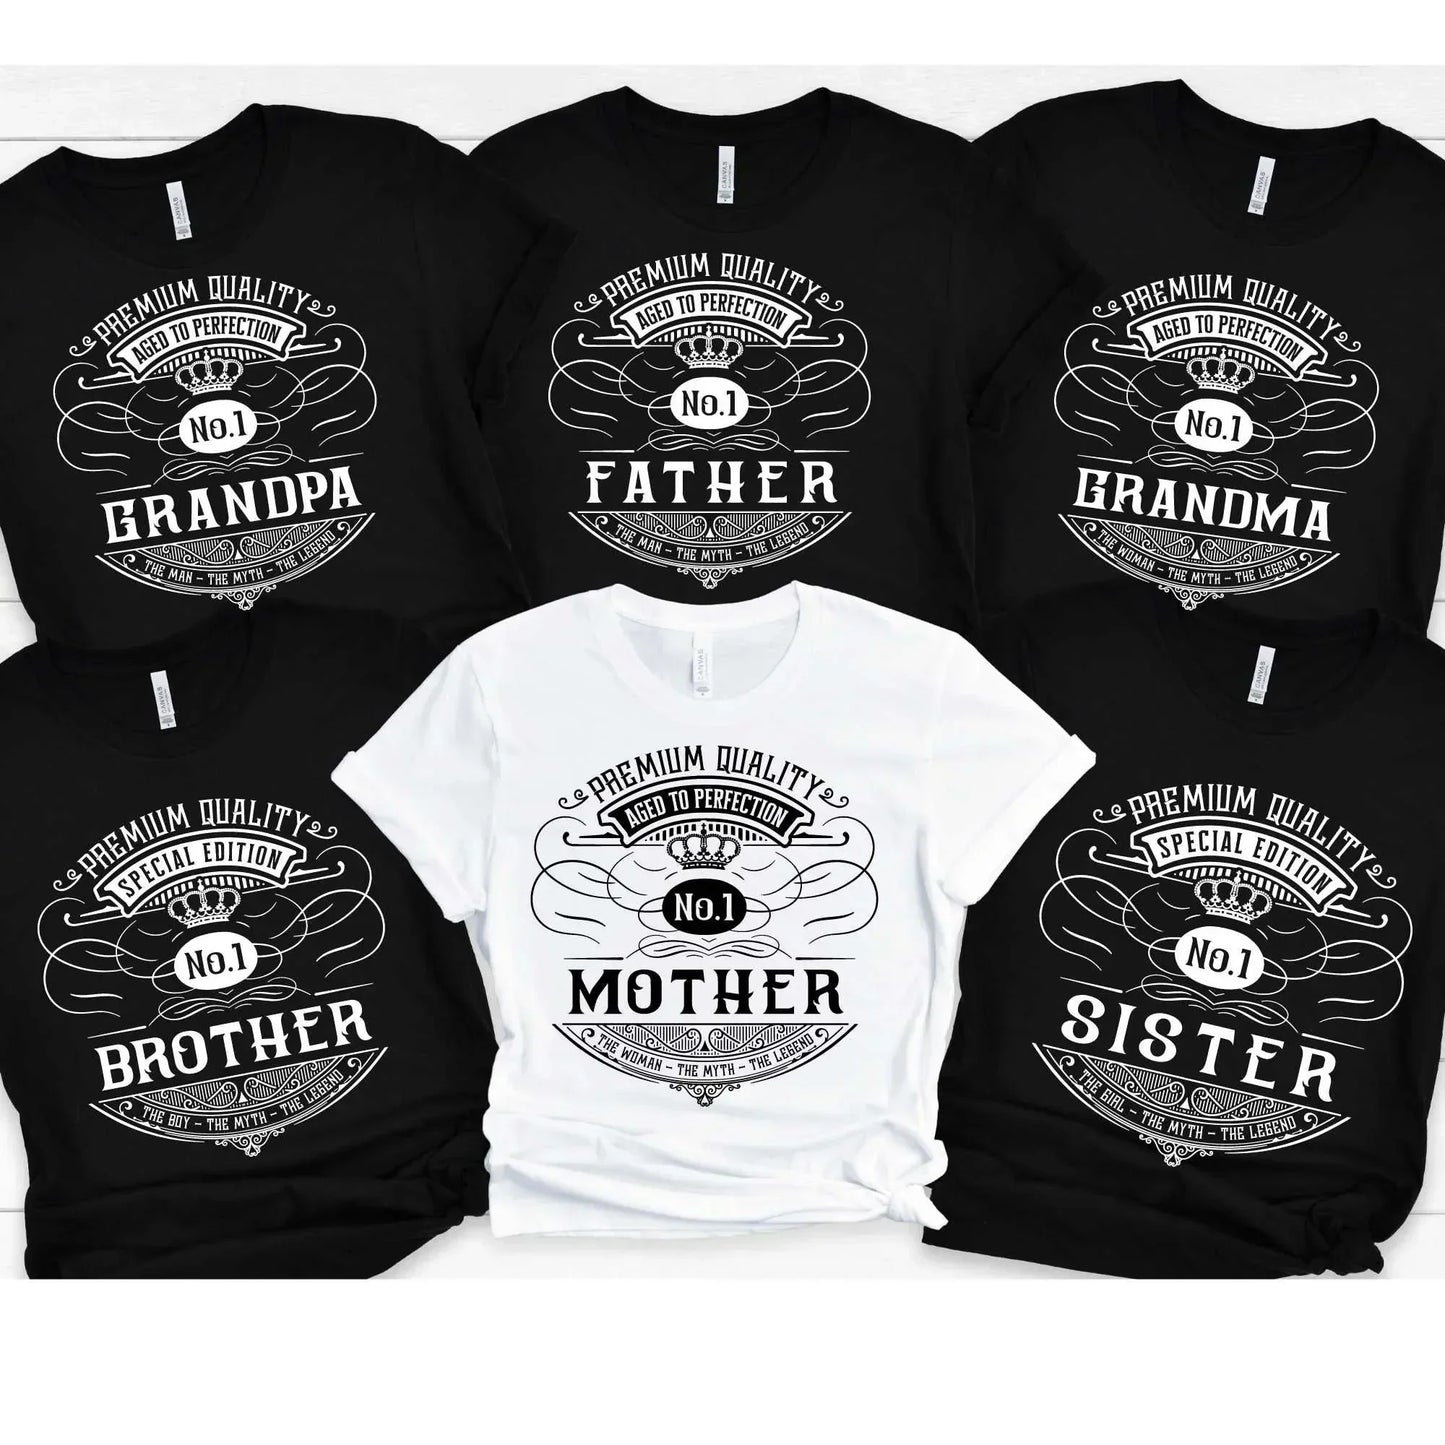 Family Reunion Matching Tees for Photos, Pregnancy Reveal Shirts, Baby Announcement Photographs, Baby Shower, Parents & Grandparents Gifts HMDesignStudioUS